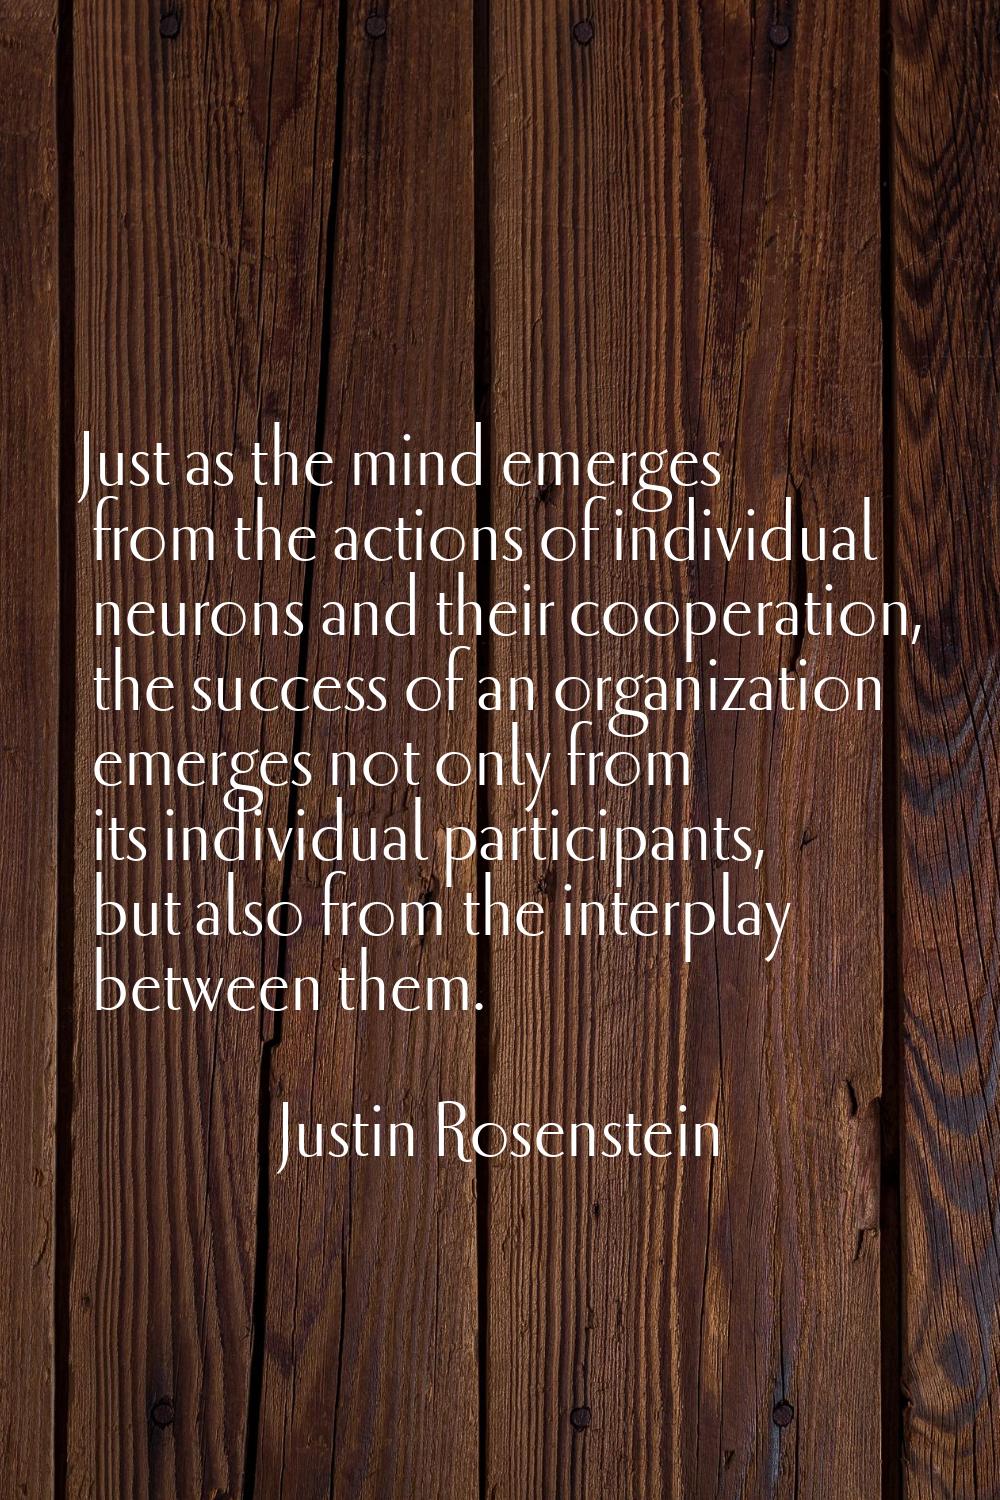 Just as the mind emerges from the actions of individual neurons and their cooperation, the success 